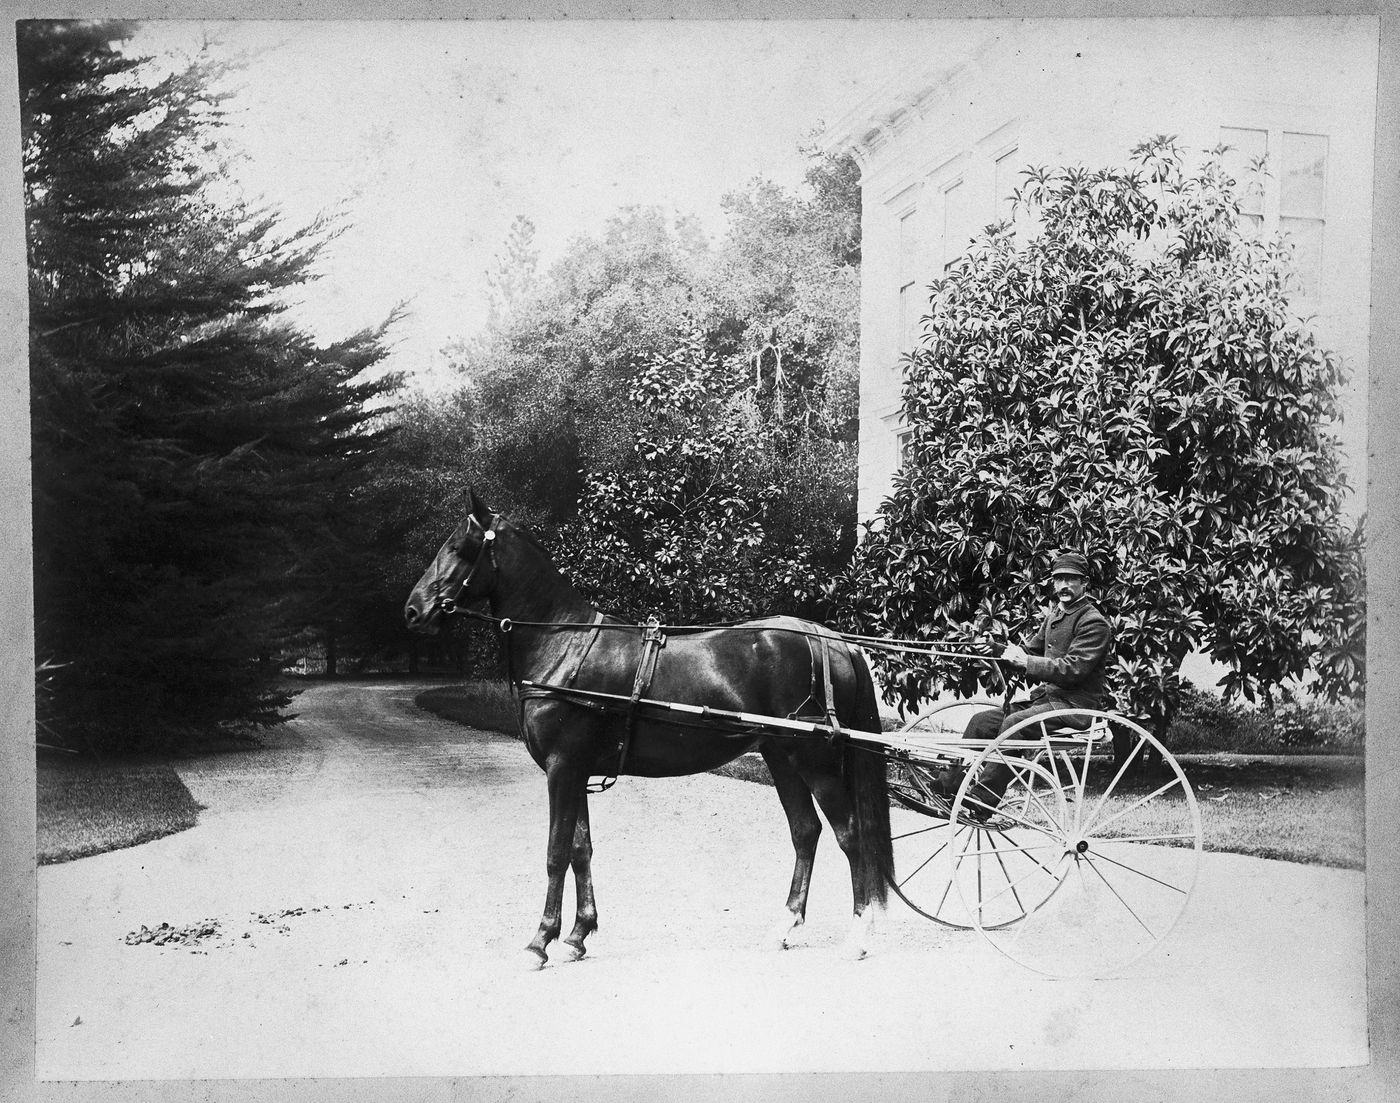 Driver with harnessed horse in driveway by carriage house, Linden Towers, James Clair Flood Estate, Atherton, California